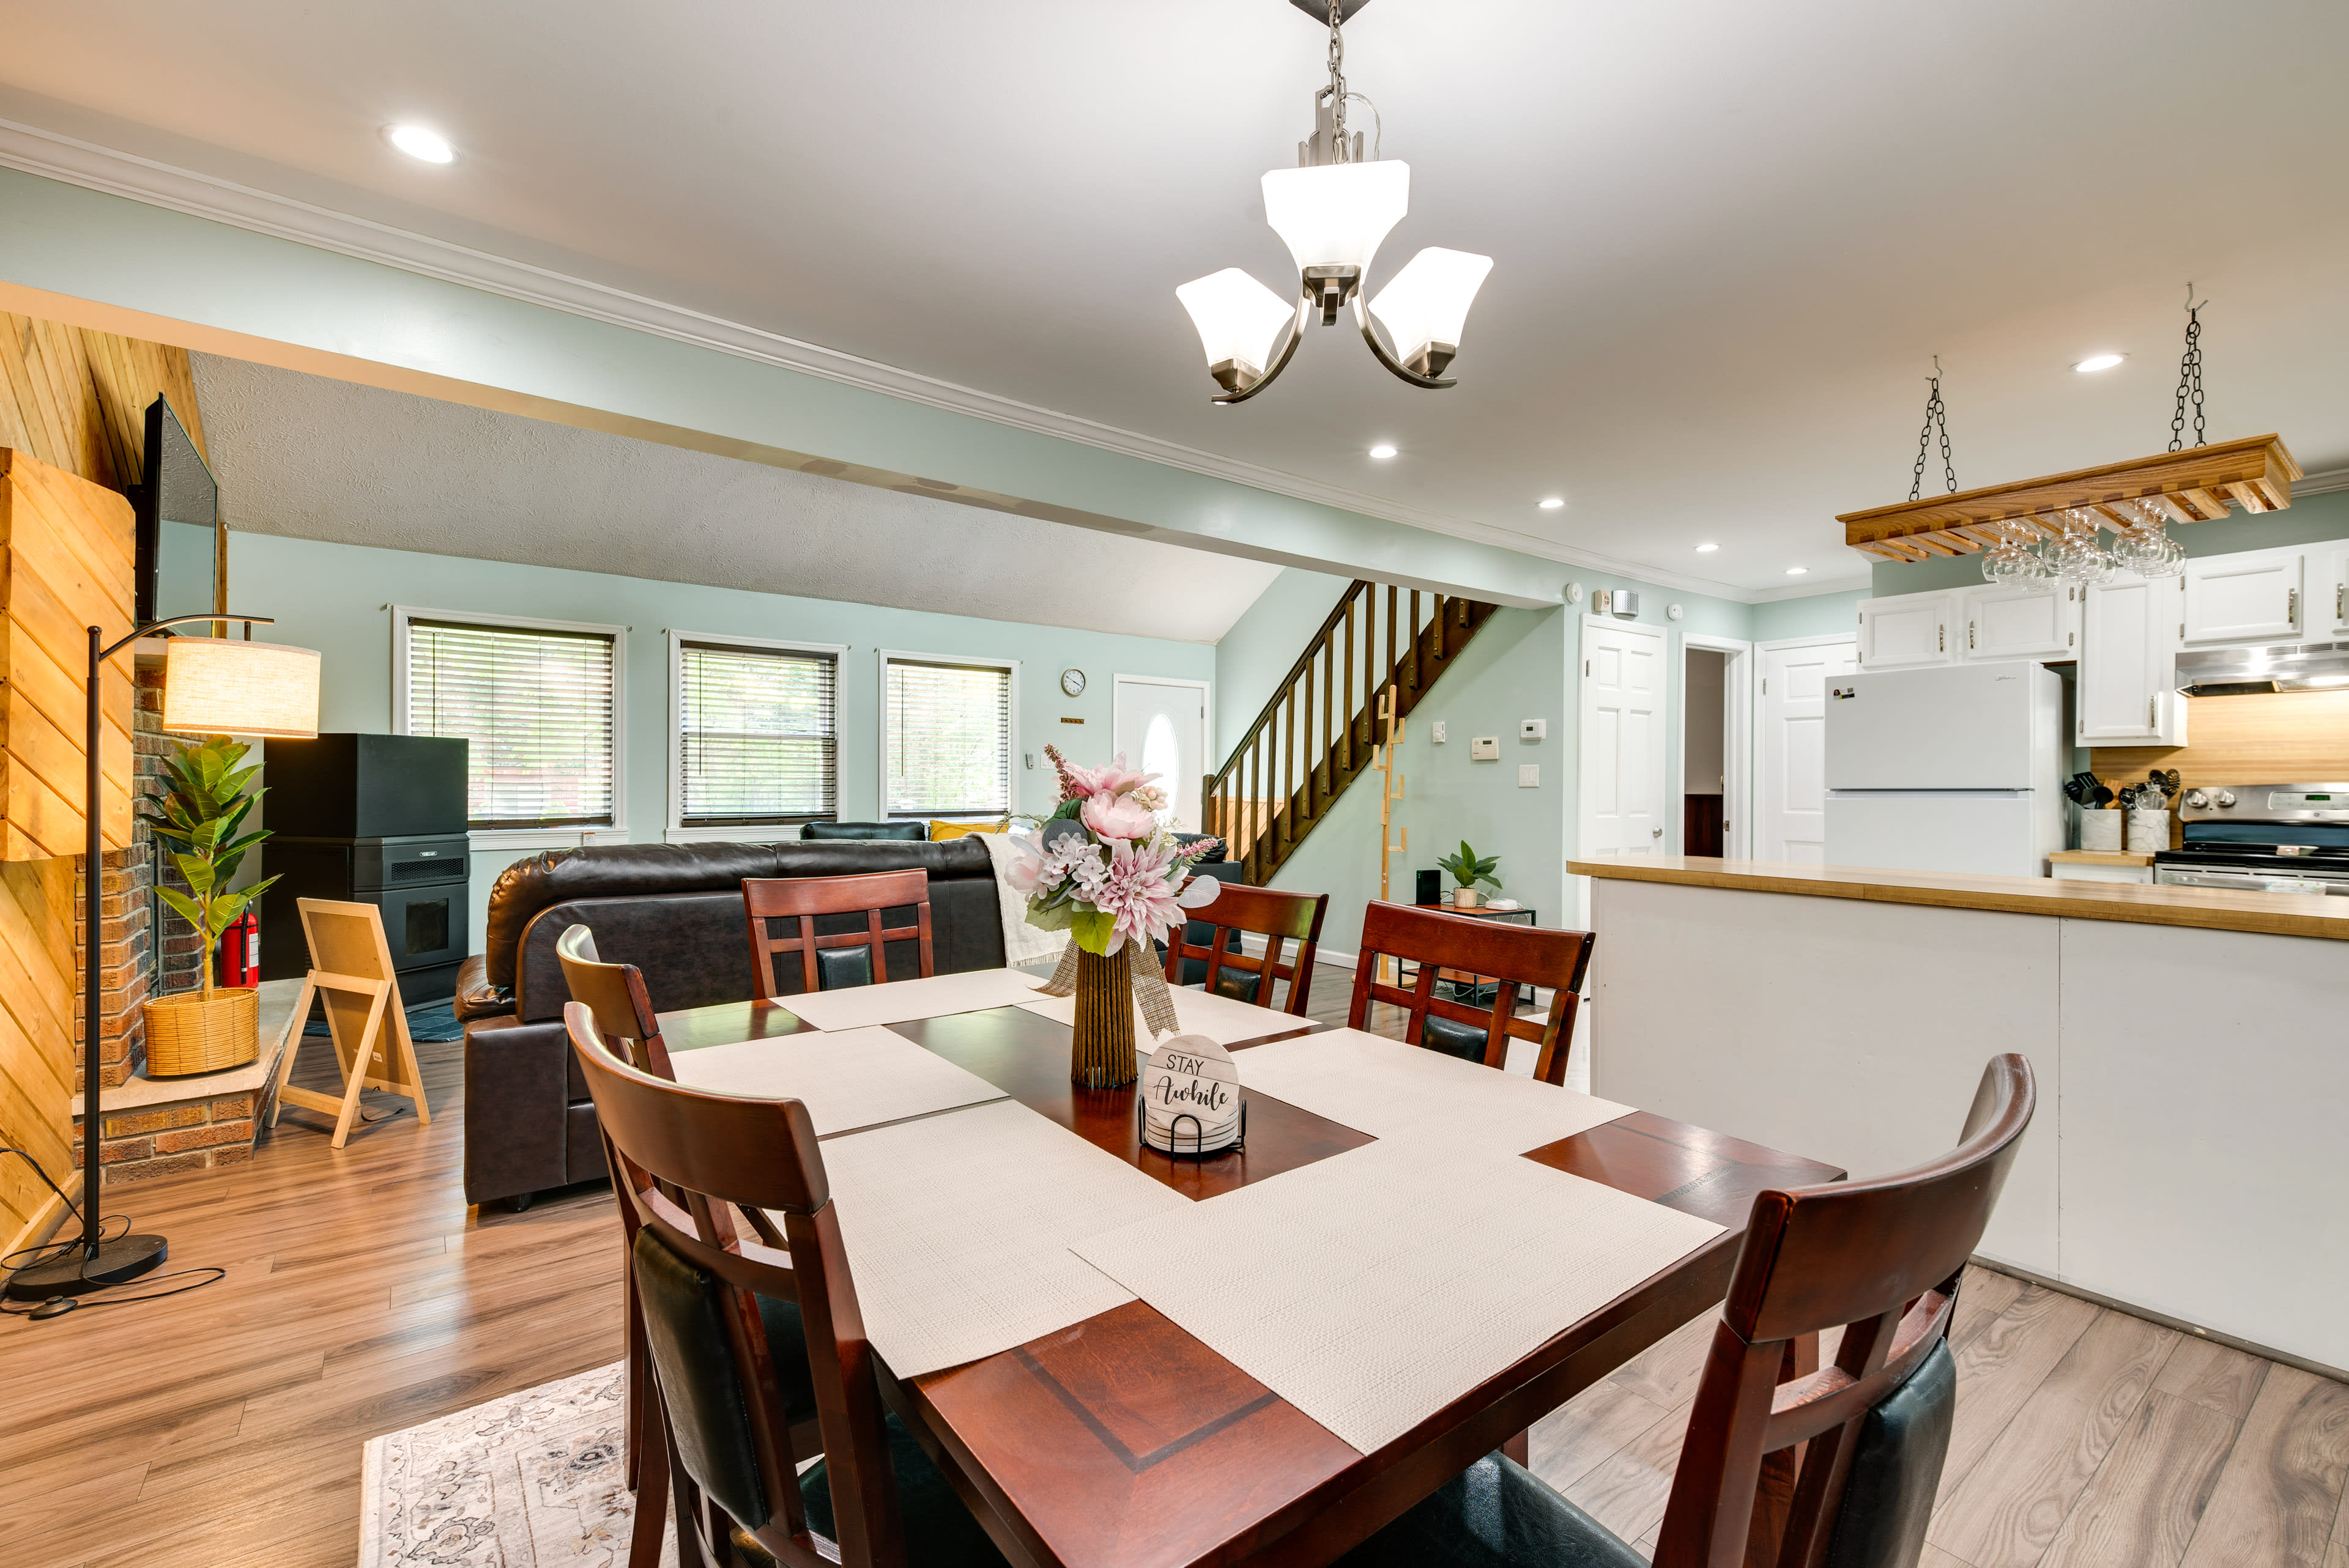 Dining Room | 1st Floor | Fully Equipped Kitchen | Cooking Basics